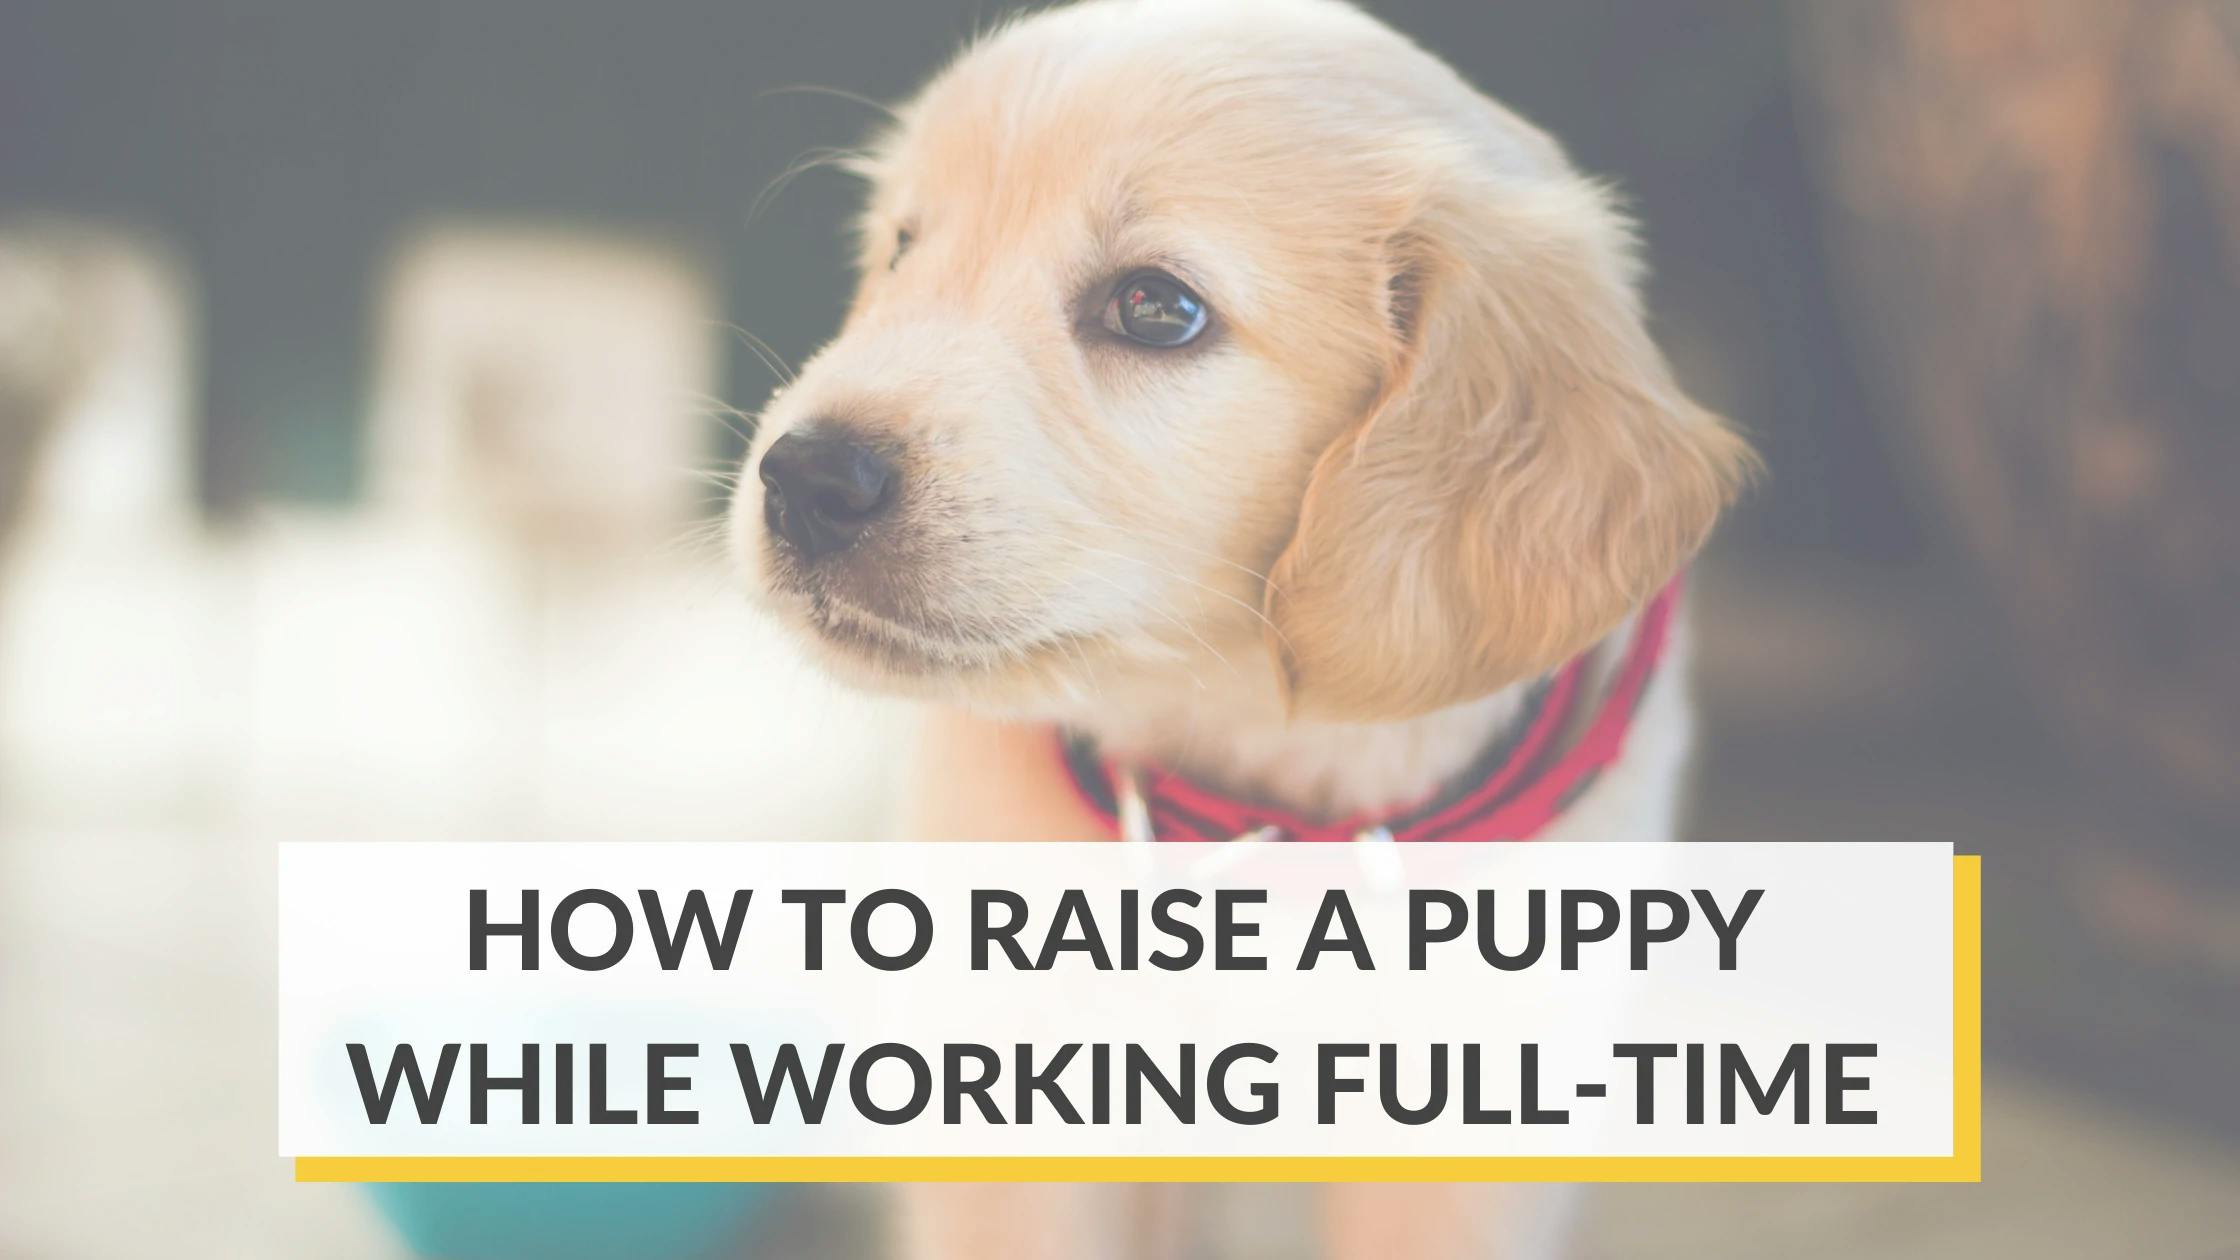 How to Keep Your Dog Busy While You're At Work! 